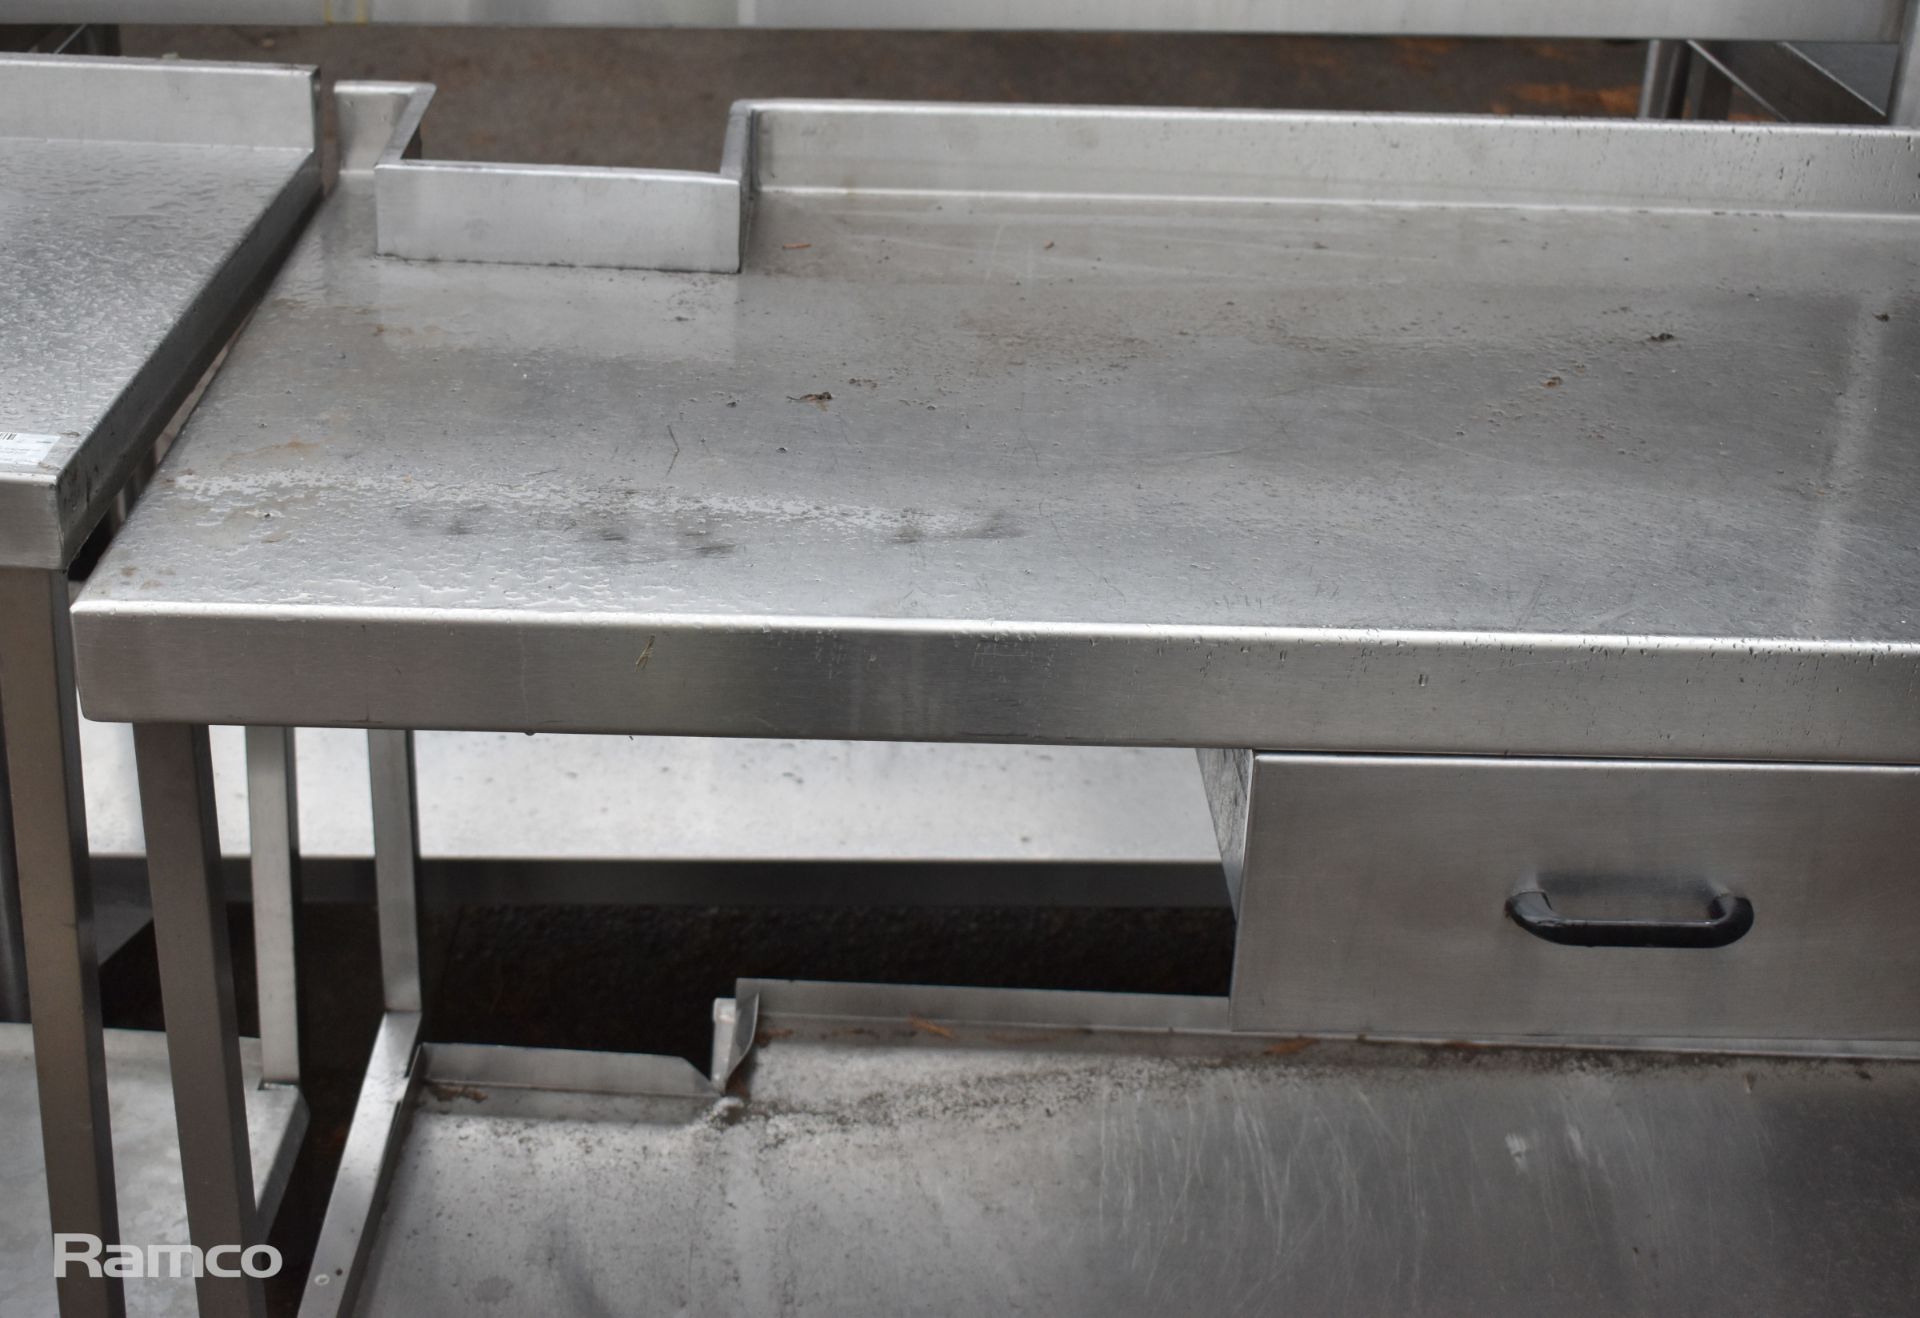 Stainless steel preparation table with single drawer - 150x70x92cm - Image 3 of 3